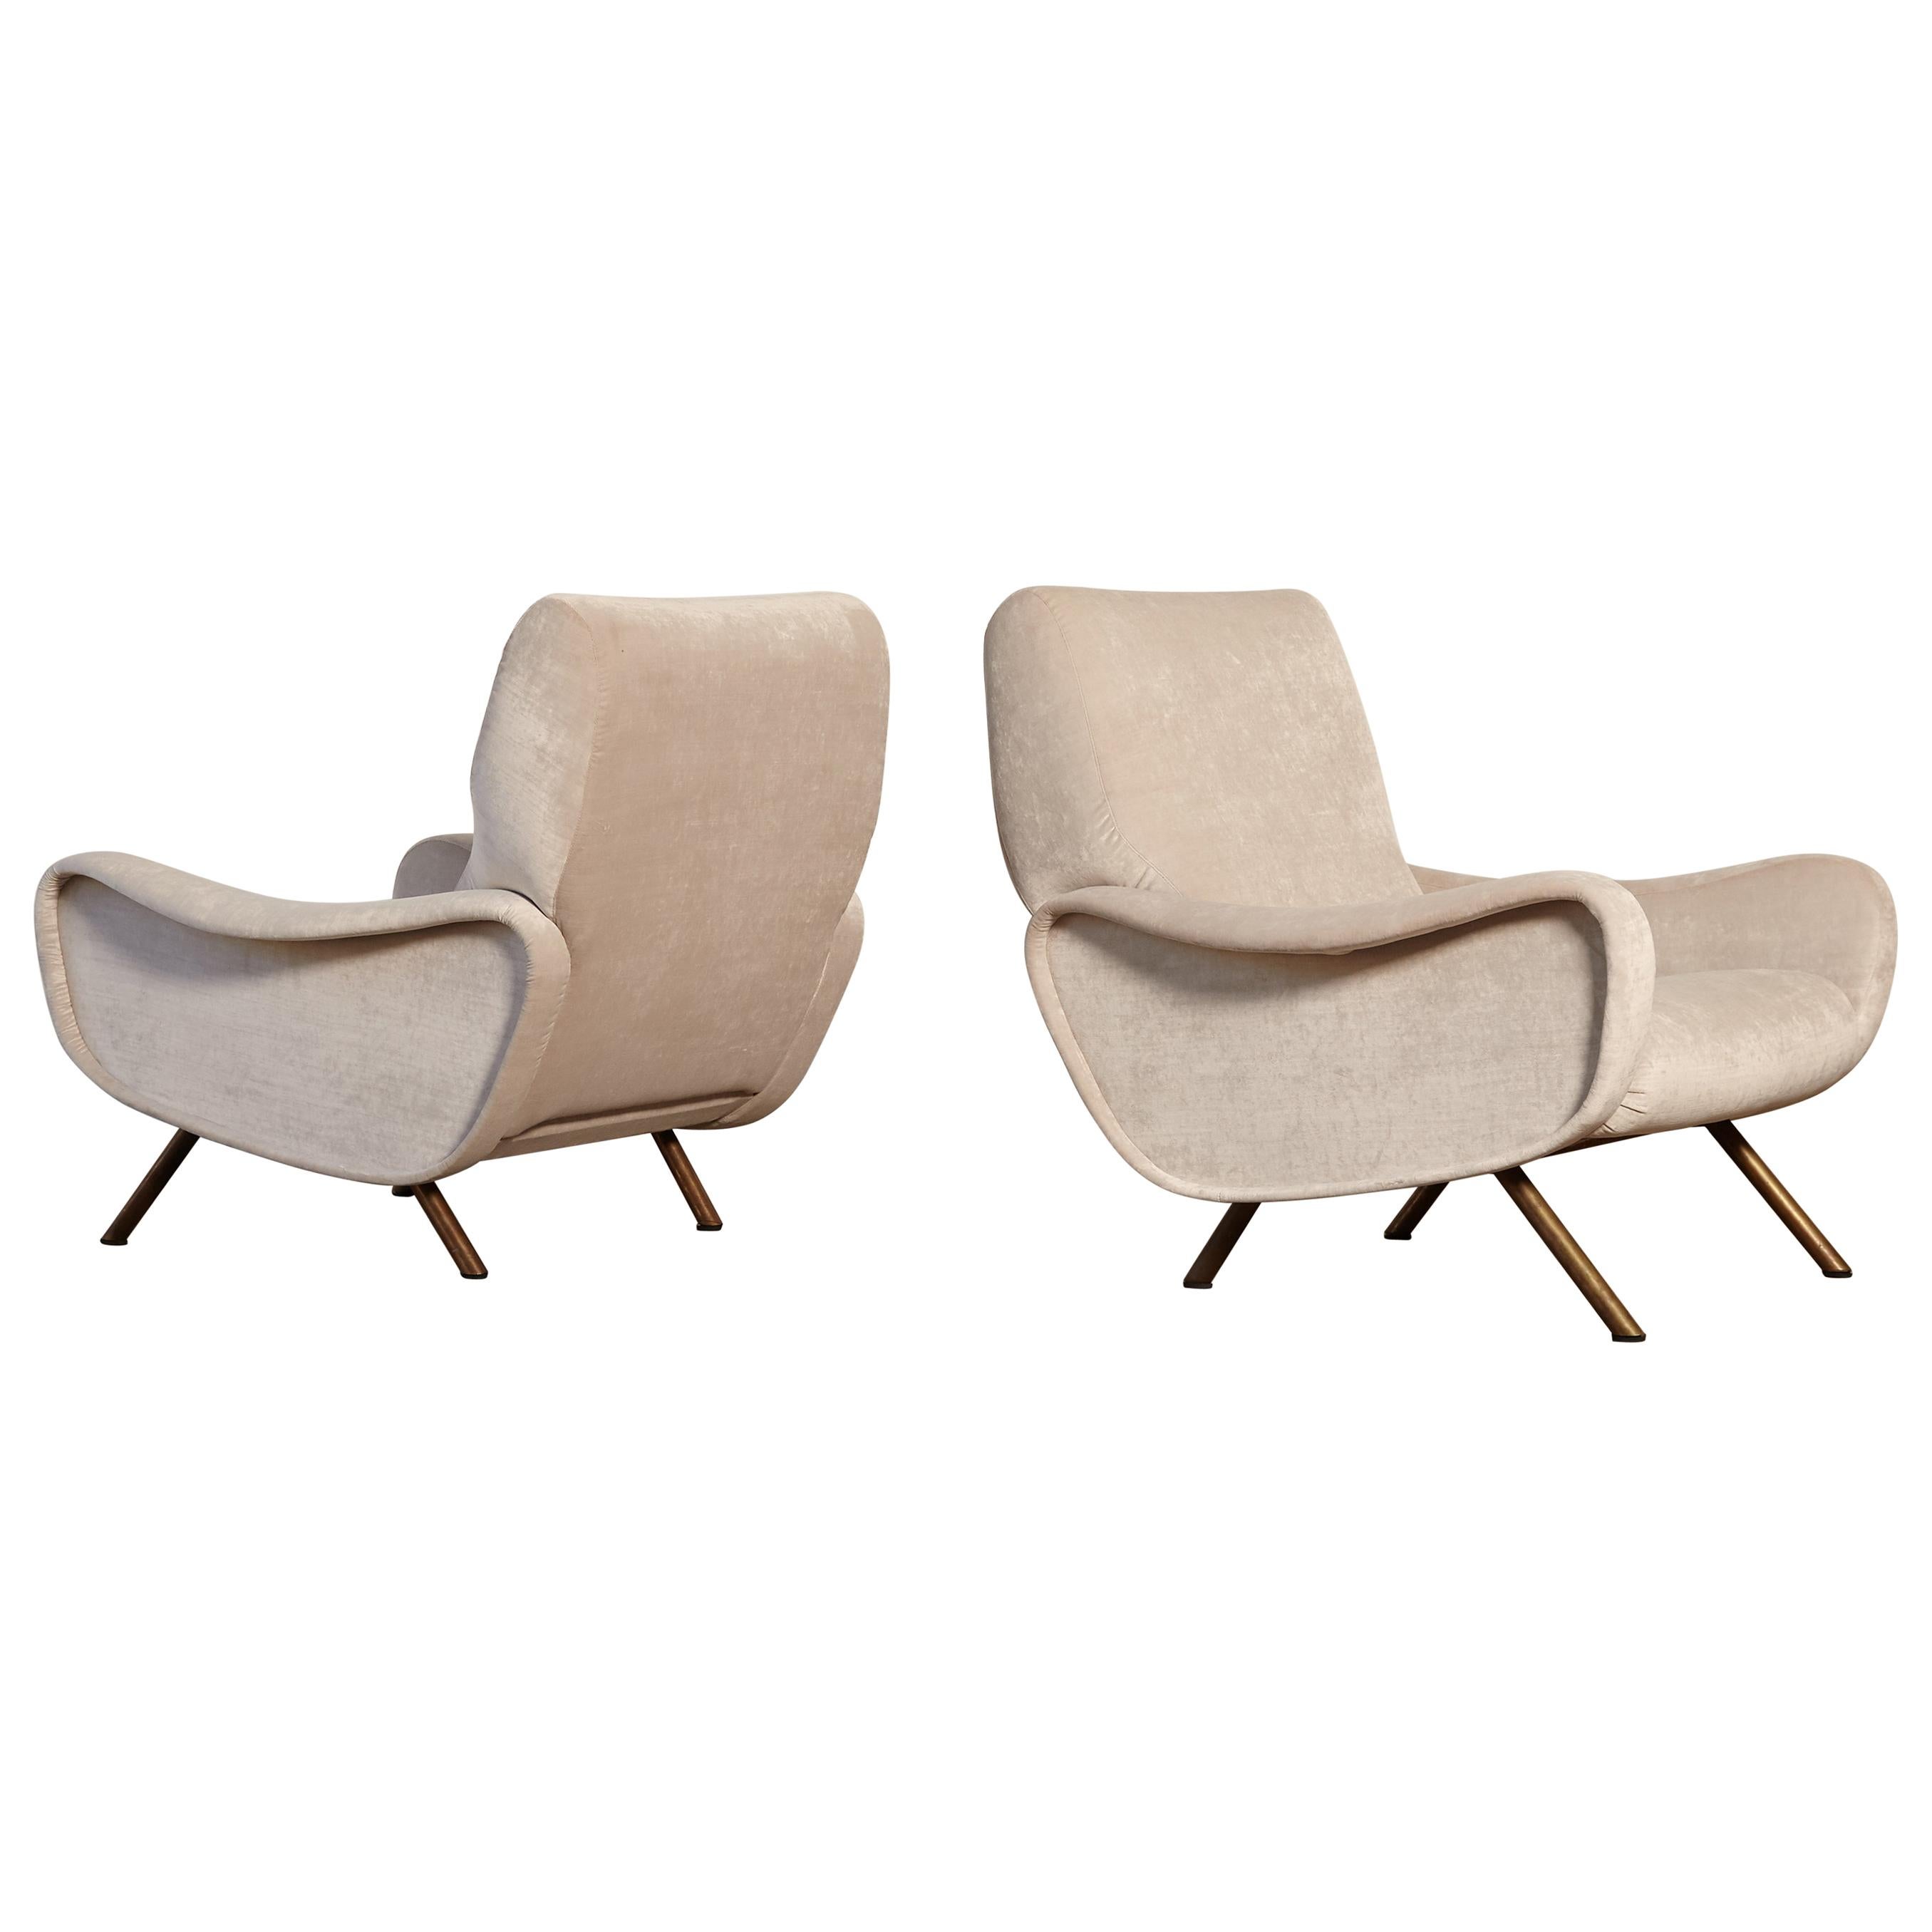 Pair of Lady Chairs Designed by Marco Zanuso, Italy